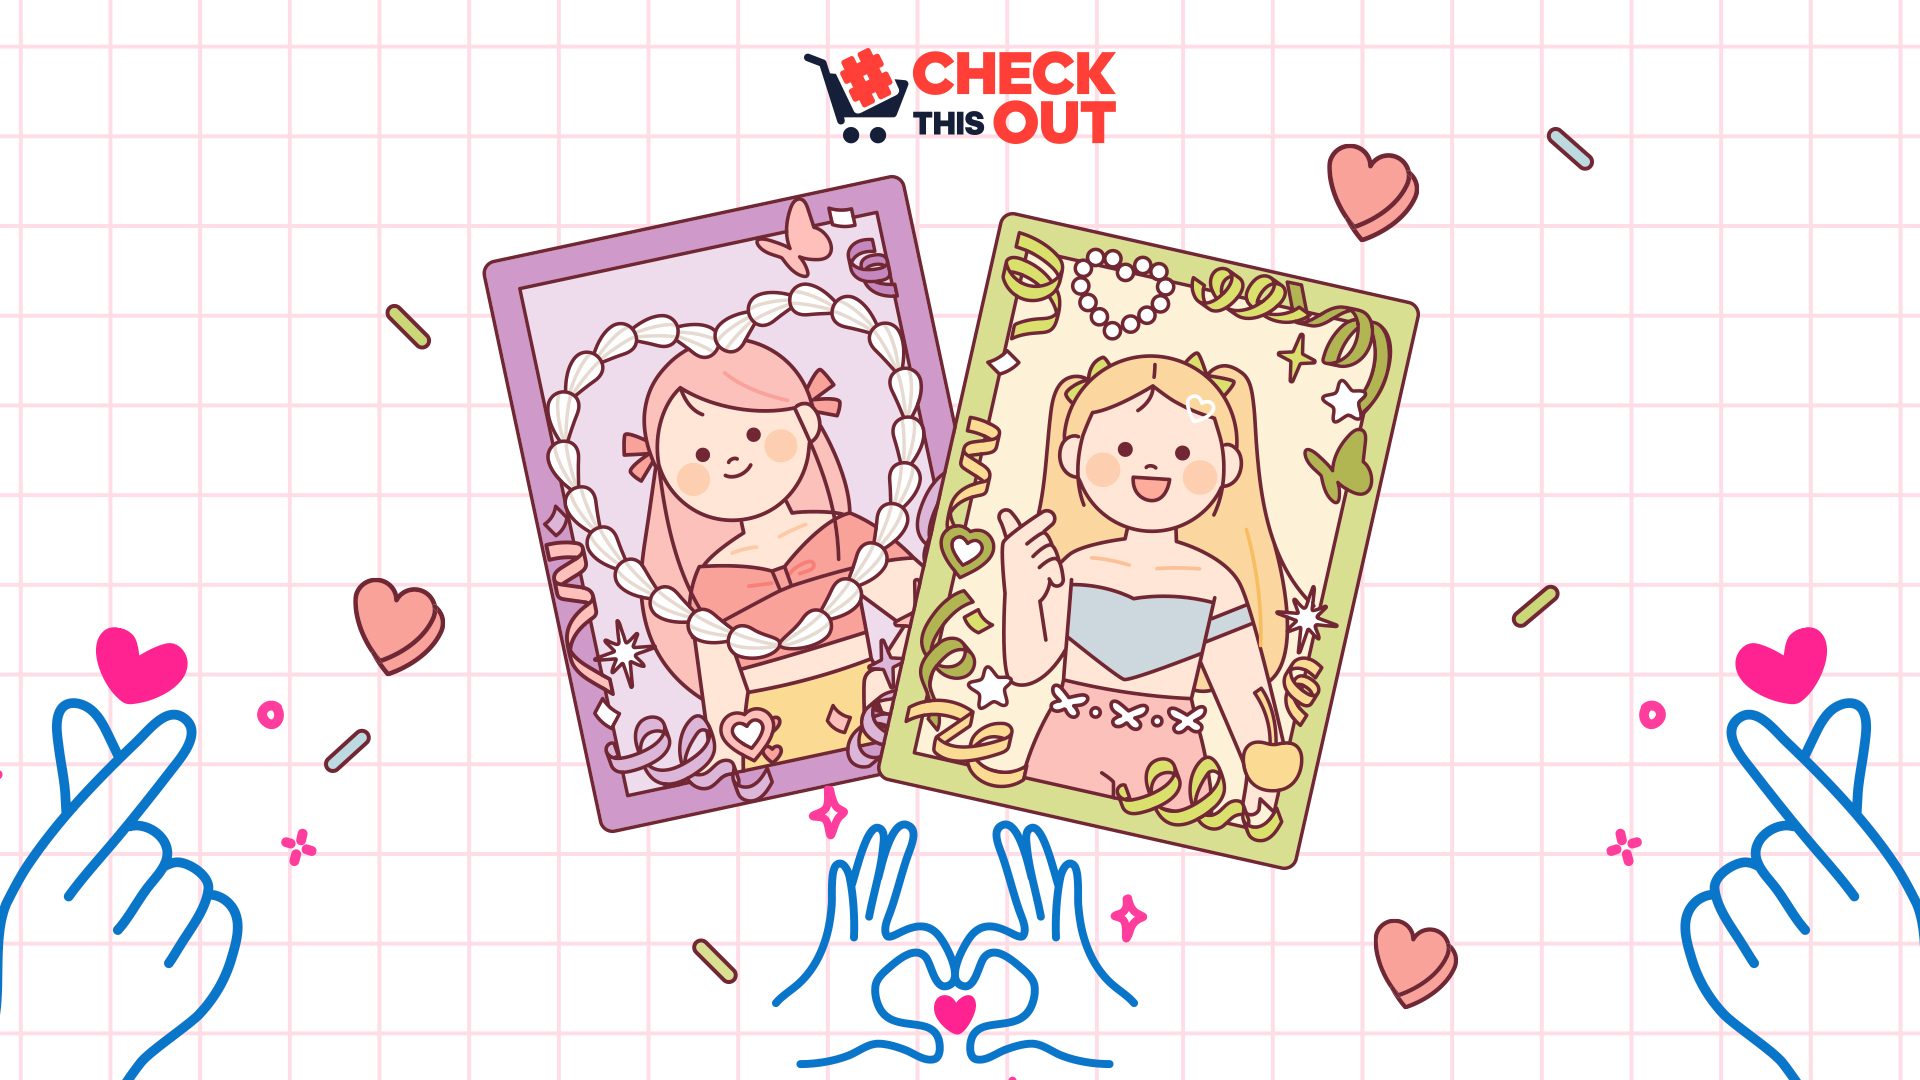 #CheckThisOut: Tools to help you protect your K-pop photocards